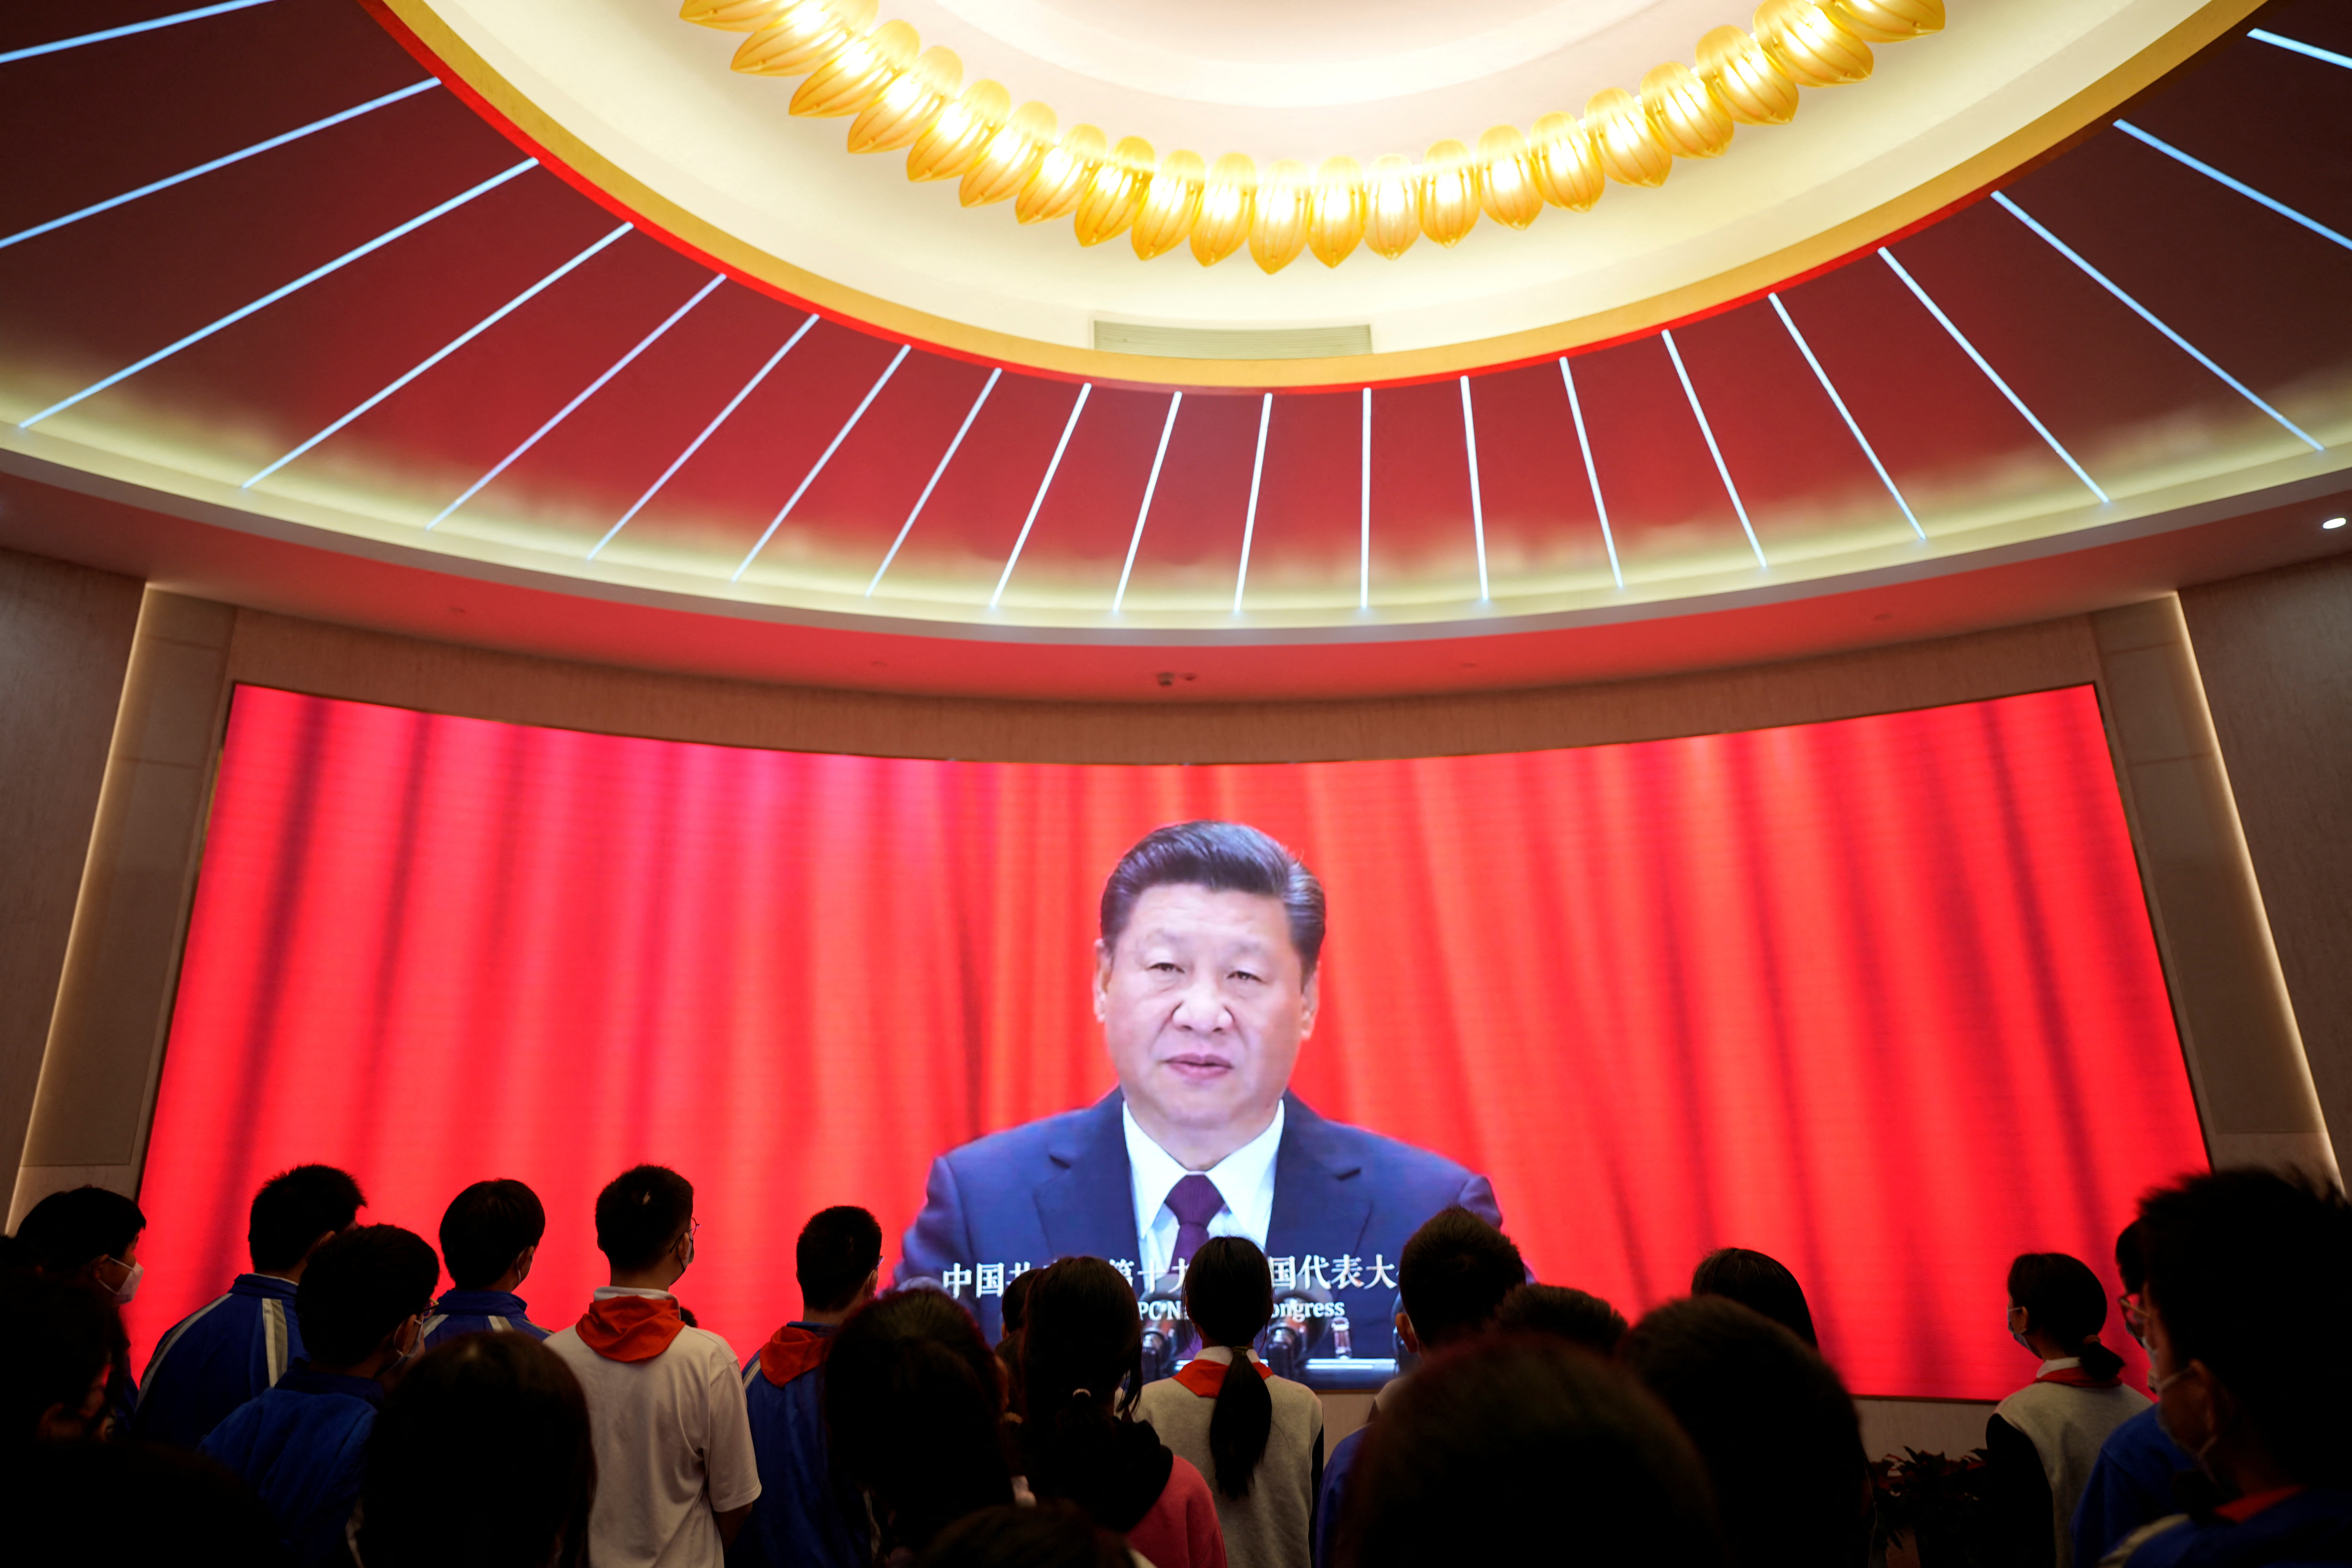 Xi Jinping's regime won its third term in China, exerting its iron grip on the country's politics.  (Reuters)